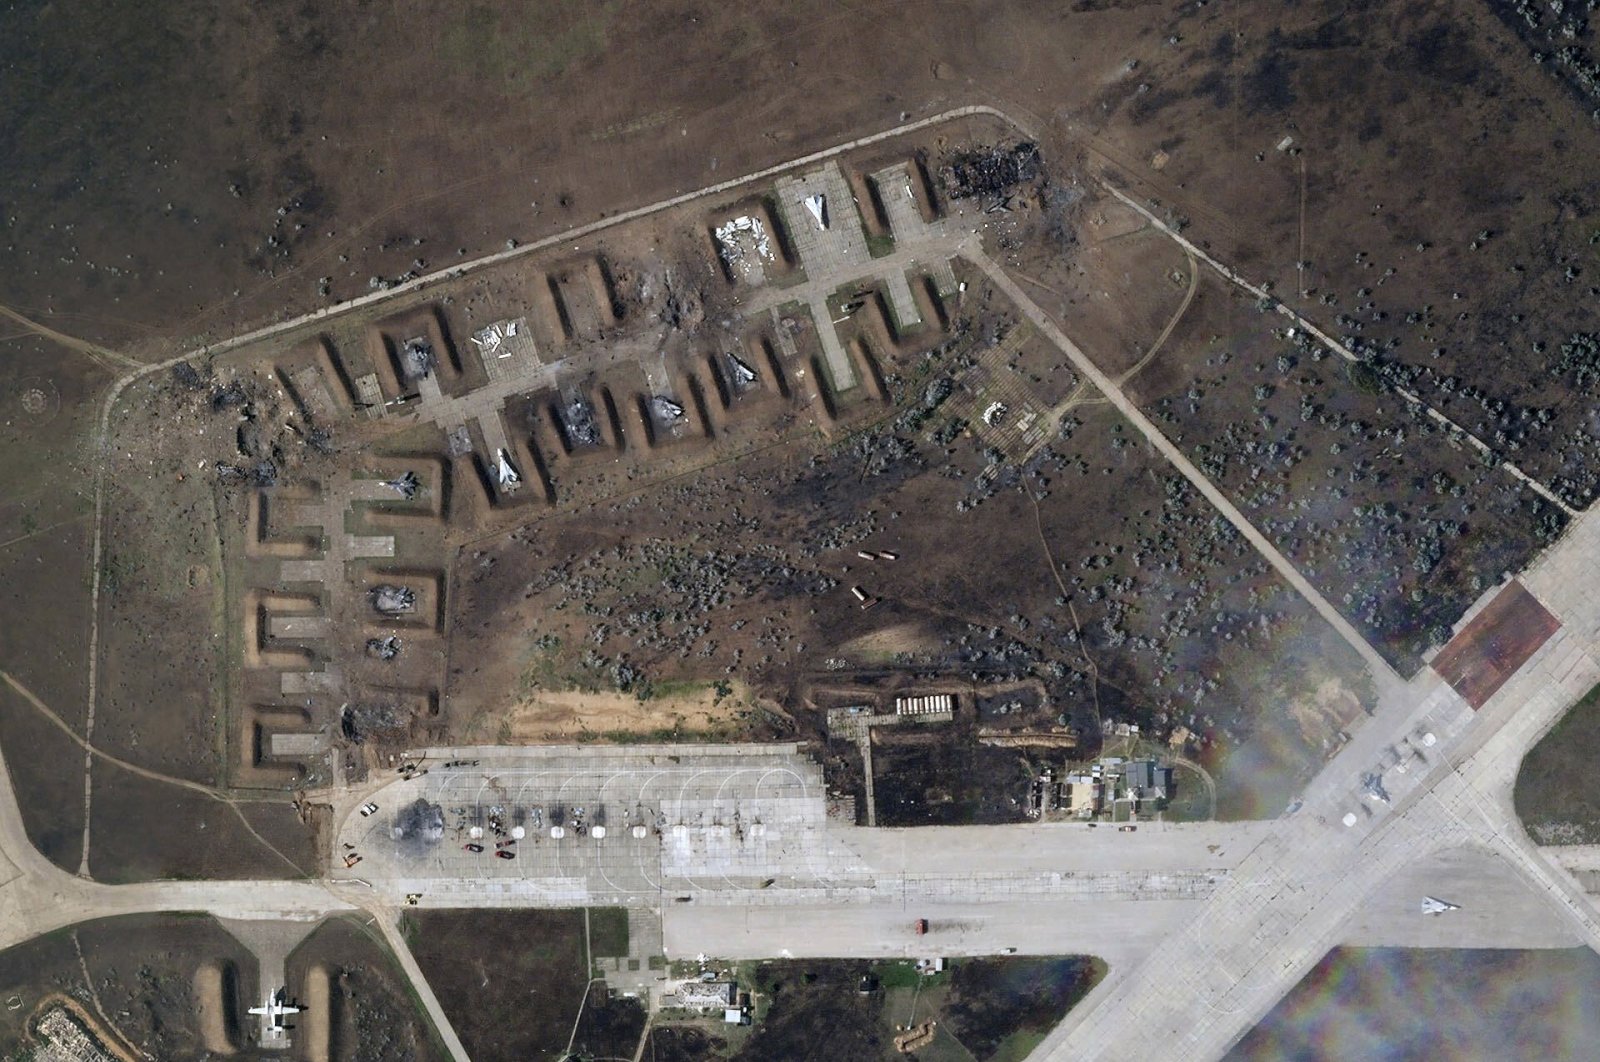 This satellite image provided by Planet Labs PBC shows destroyed Russian aircraft at Saki Air Base after an explosion Tuesday, Aug. 9, 2022, in the Crimean Peninsula, the Black Sea peninsula seized from Ukraine by Russia and annexed in March 2014. Ukraine&#039;s air force said Wednesday, Aug. 10, 2022 that nine Russian warplanes were destroyed in a deadly string of explosions at an air base in Crimea that appeared to be the result of a Ukrainian attack, which would represent a significant escalation in the war. (Planet Labs PBC via AP)